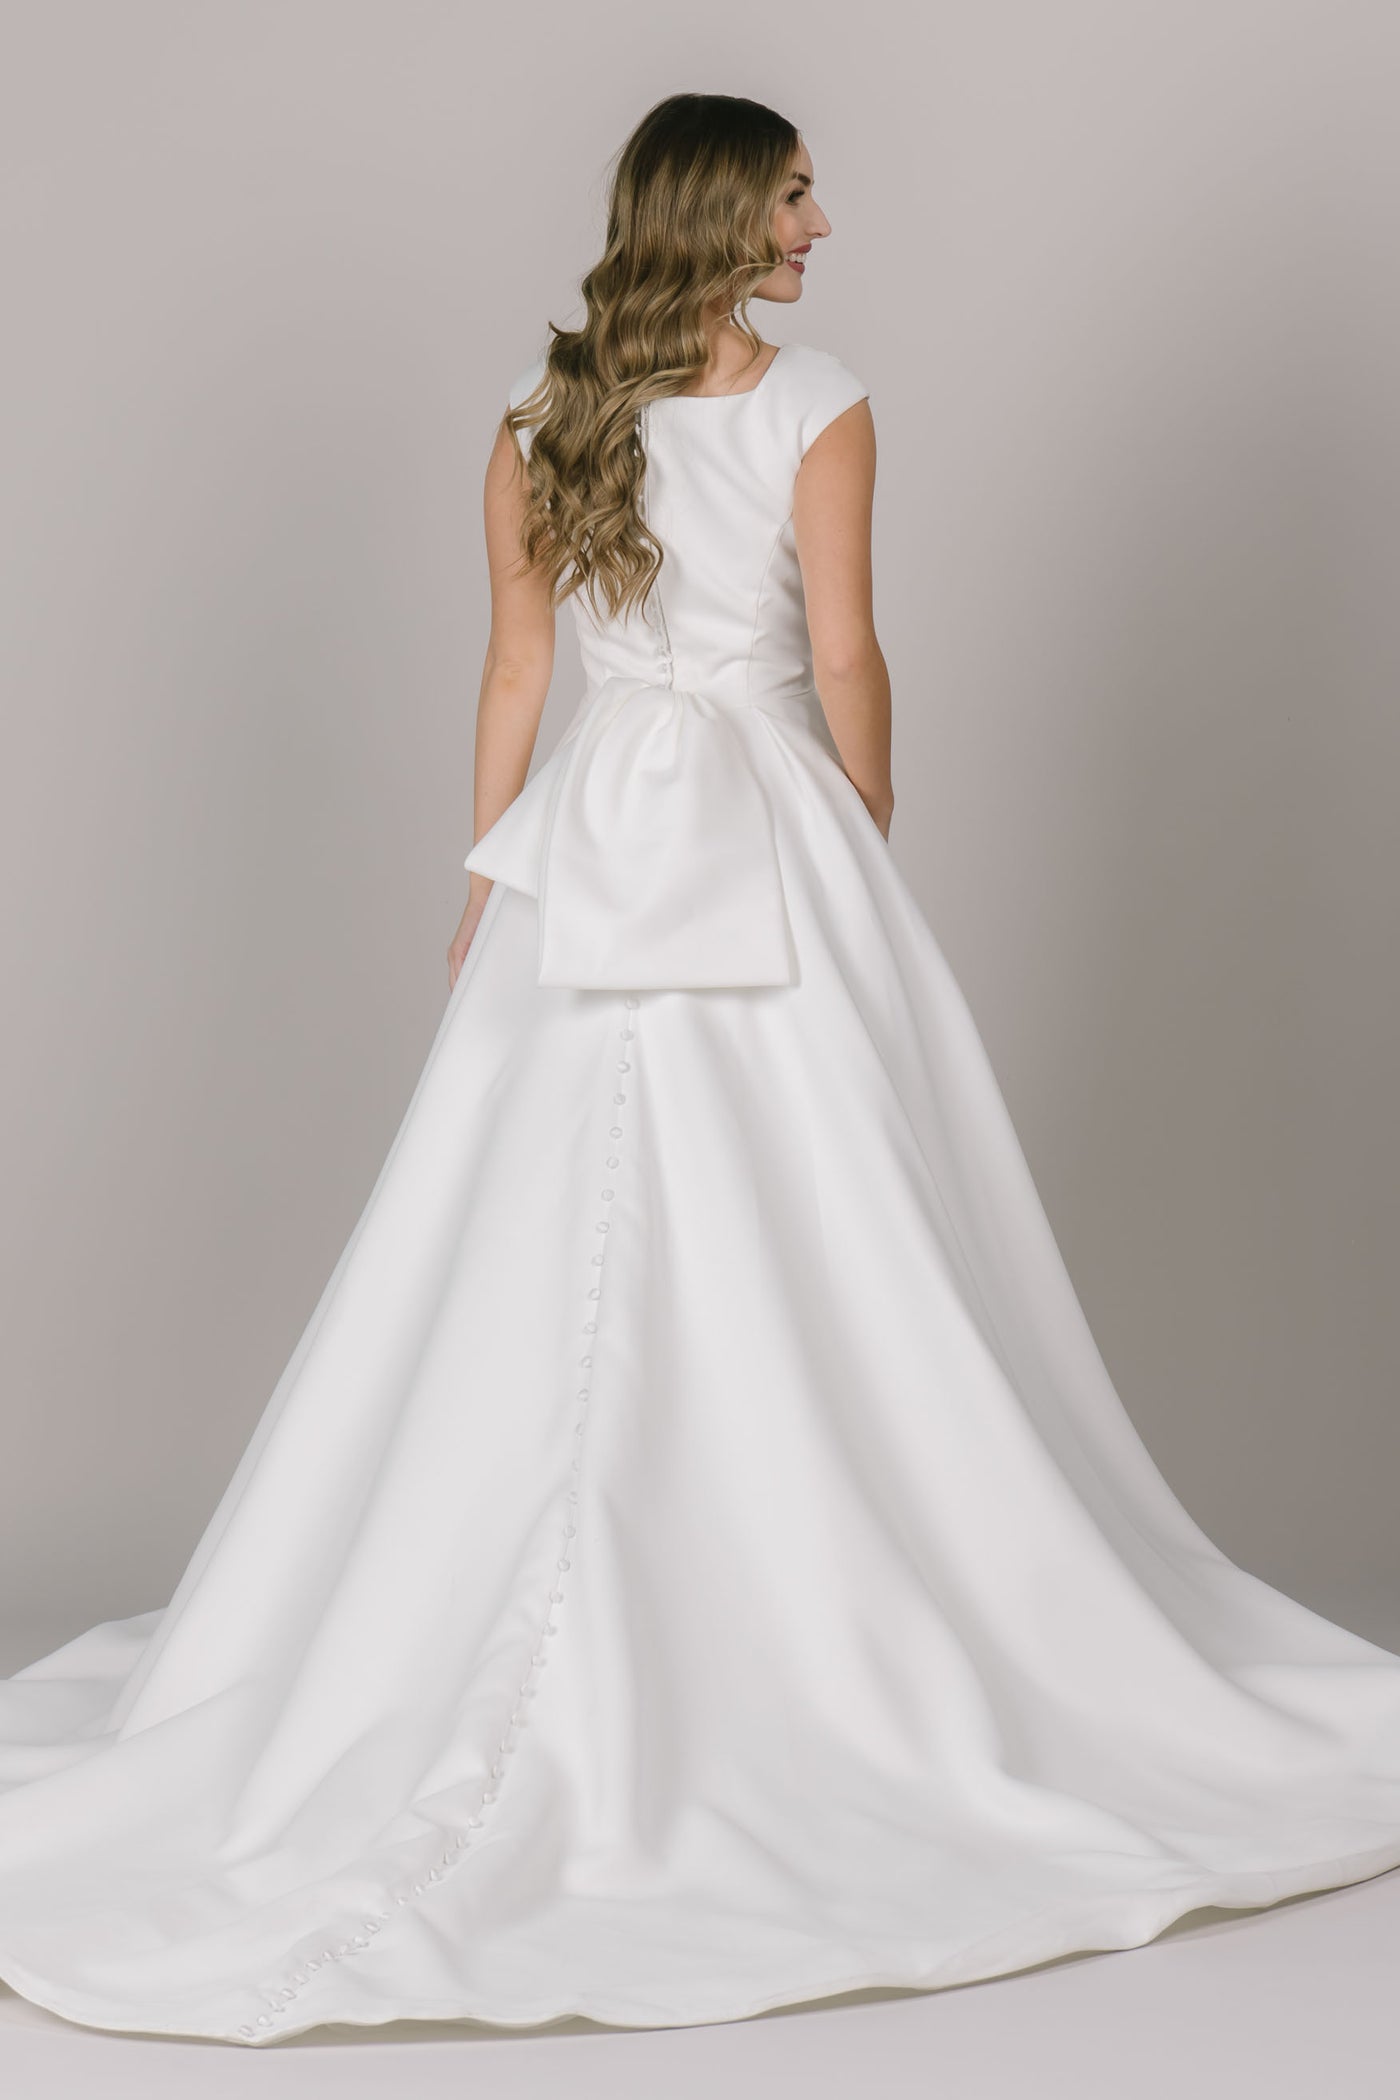 A back angle of a beautiful modest wedding dress in Bluffdale, UT with a bow, buttons going all the way down the gown, and a stunning square neckline.